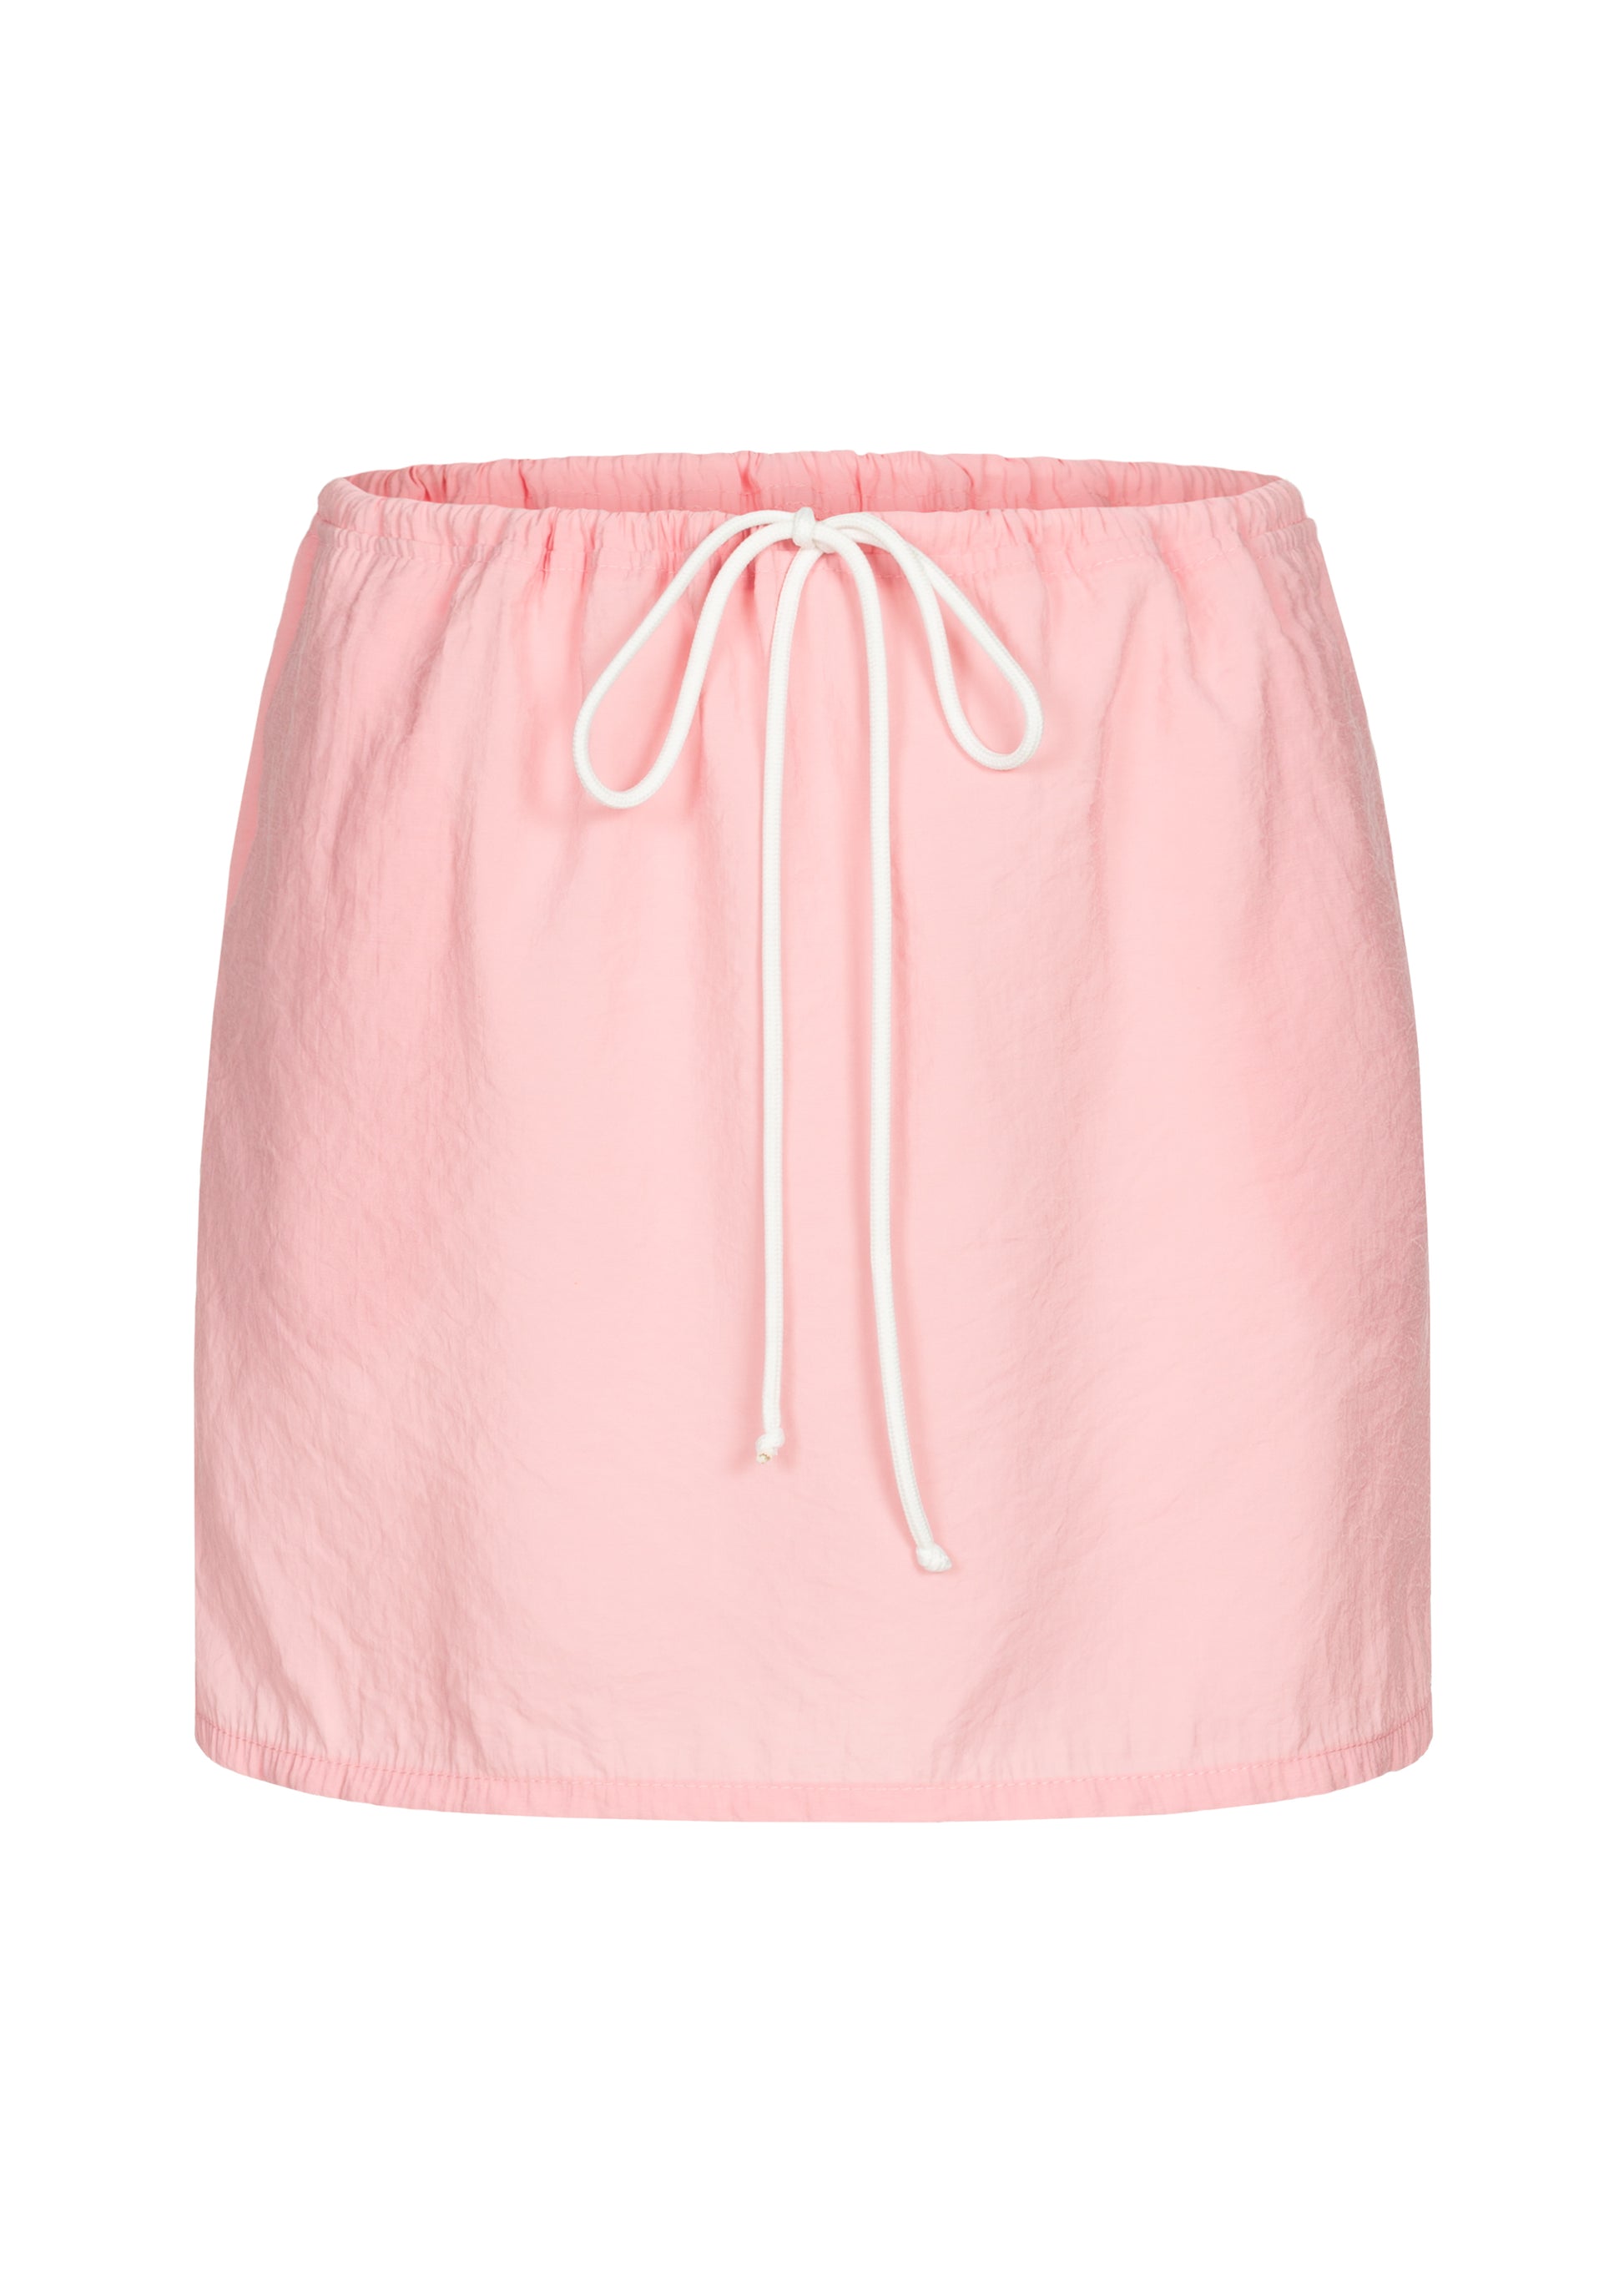 Viscose blend skirt featuring a drawstring fastening waist, side pockets and a short length from FORMA